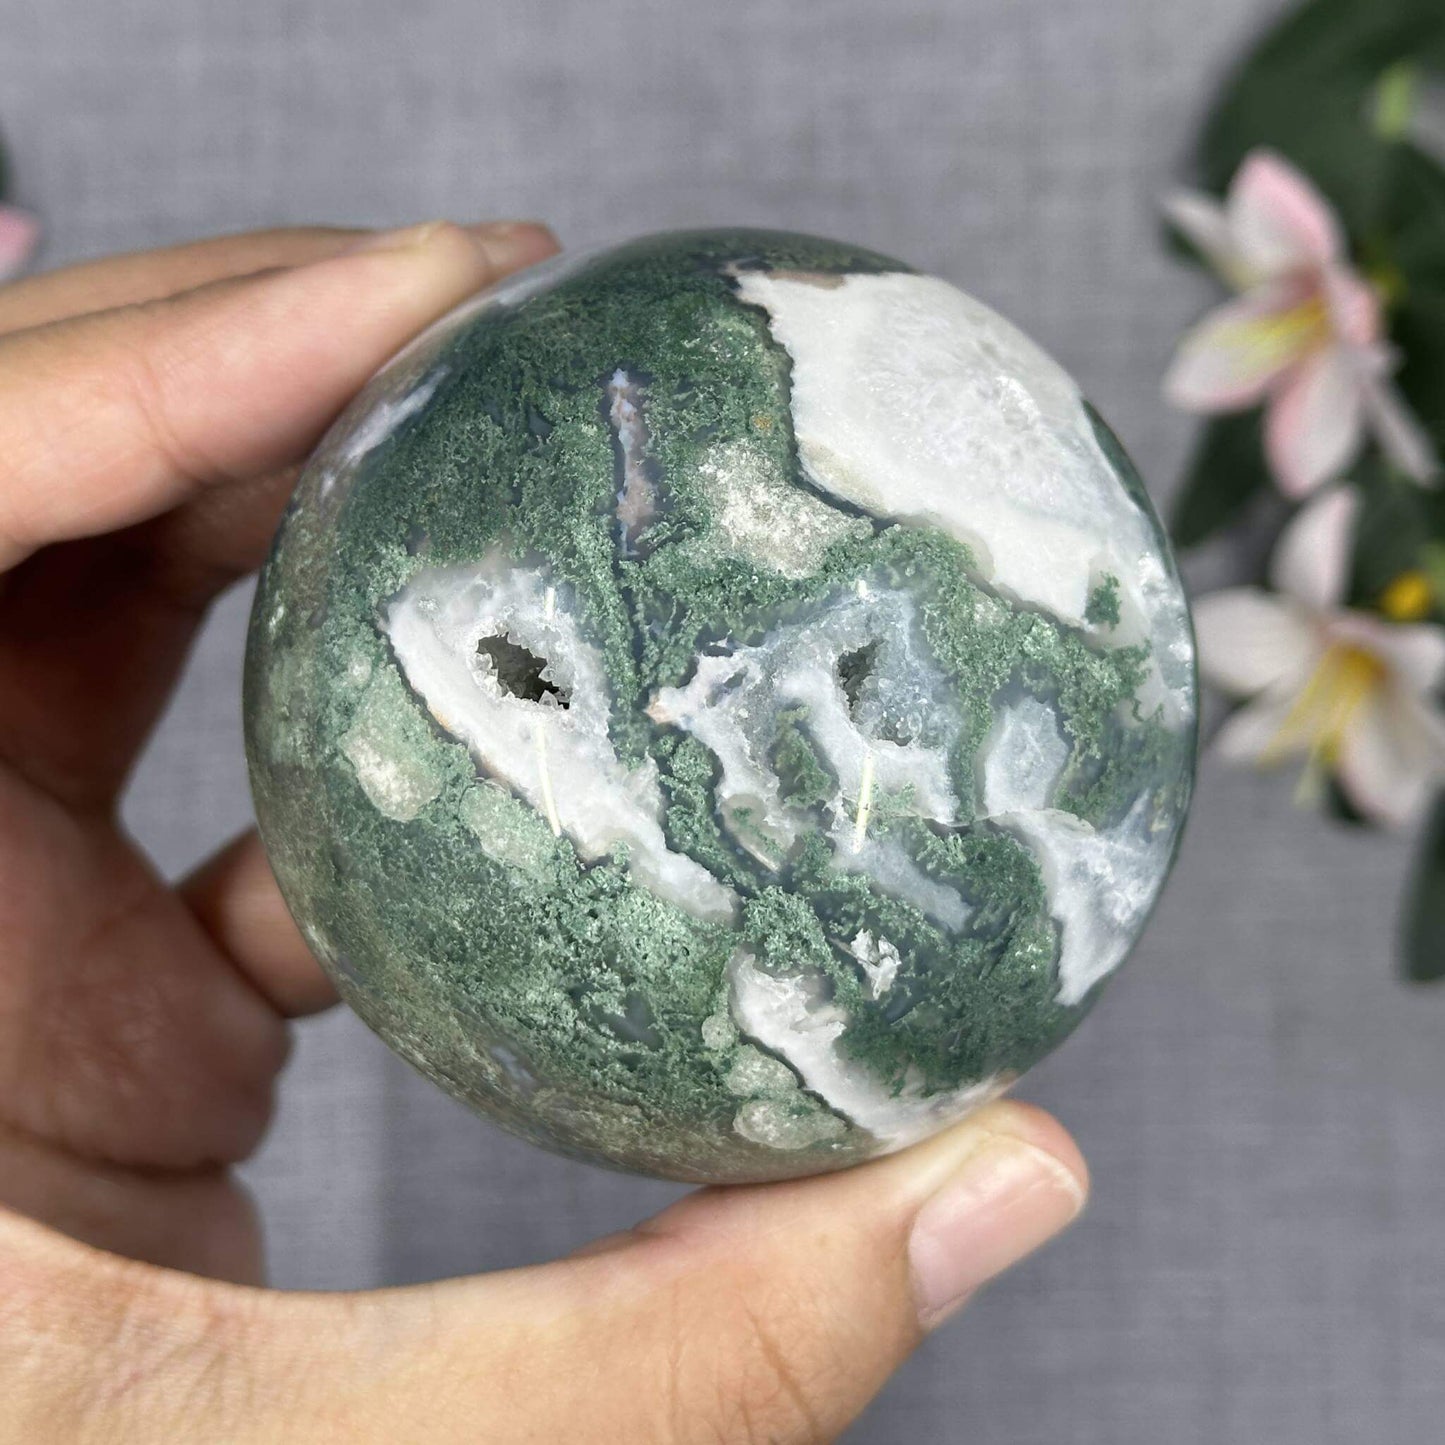 Druzy Moss Agate Crystal Sphere 68.3mm - Itsy's Crystal Cove LLC